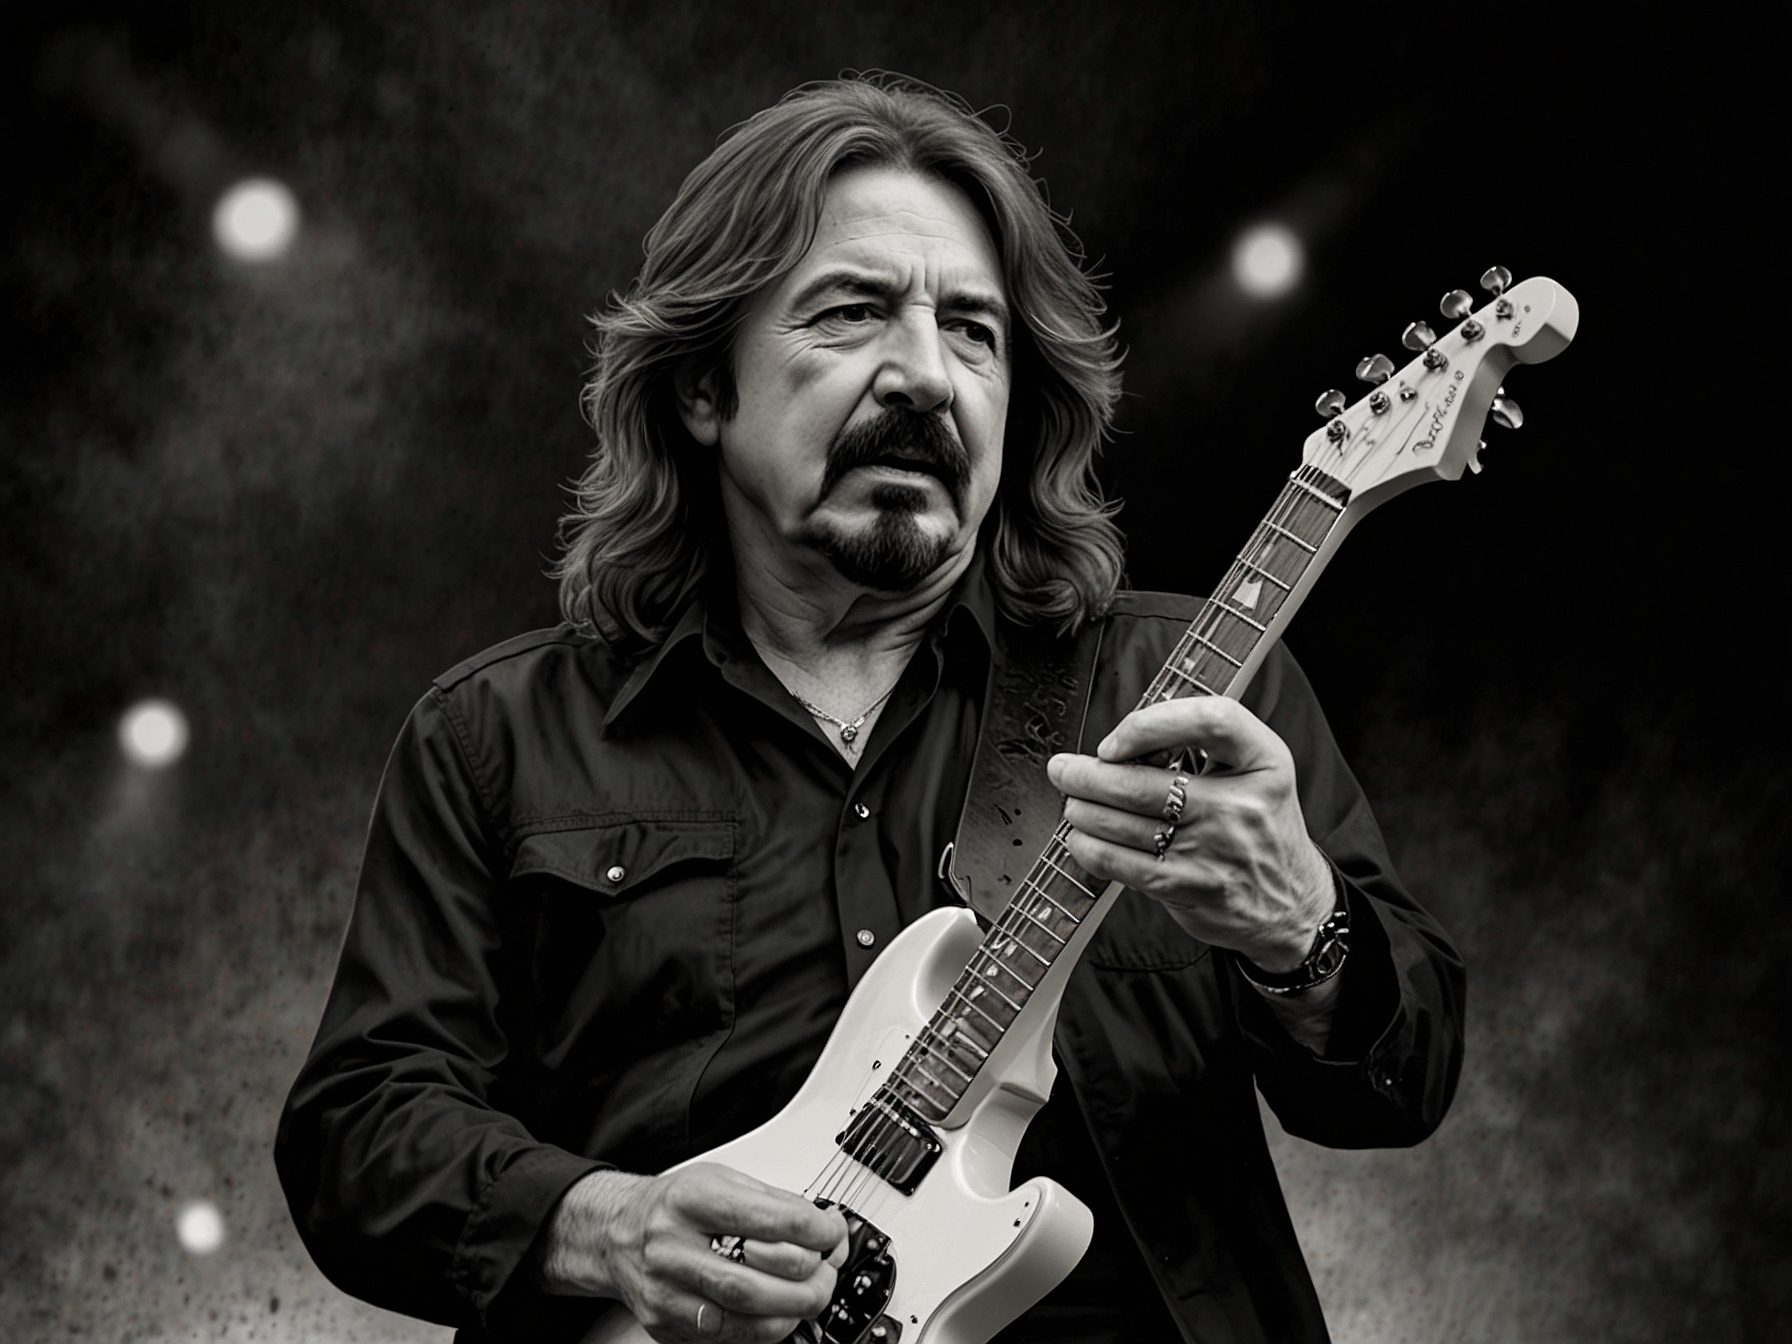 Geezer Butler, legendary bassist of Black Sabbath, performing 'Paranoid' on stage with Foo Fighters in Birmingham, electrifying the audience with a historic rock collaboration.